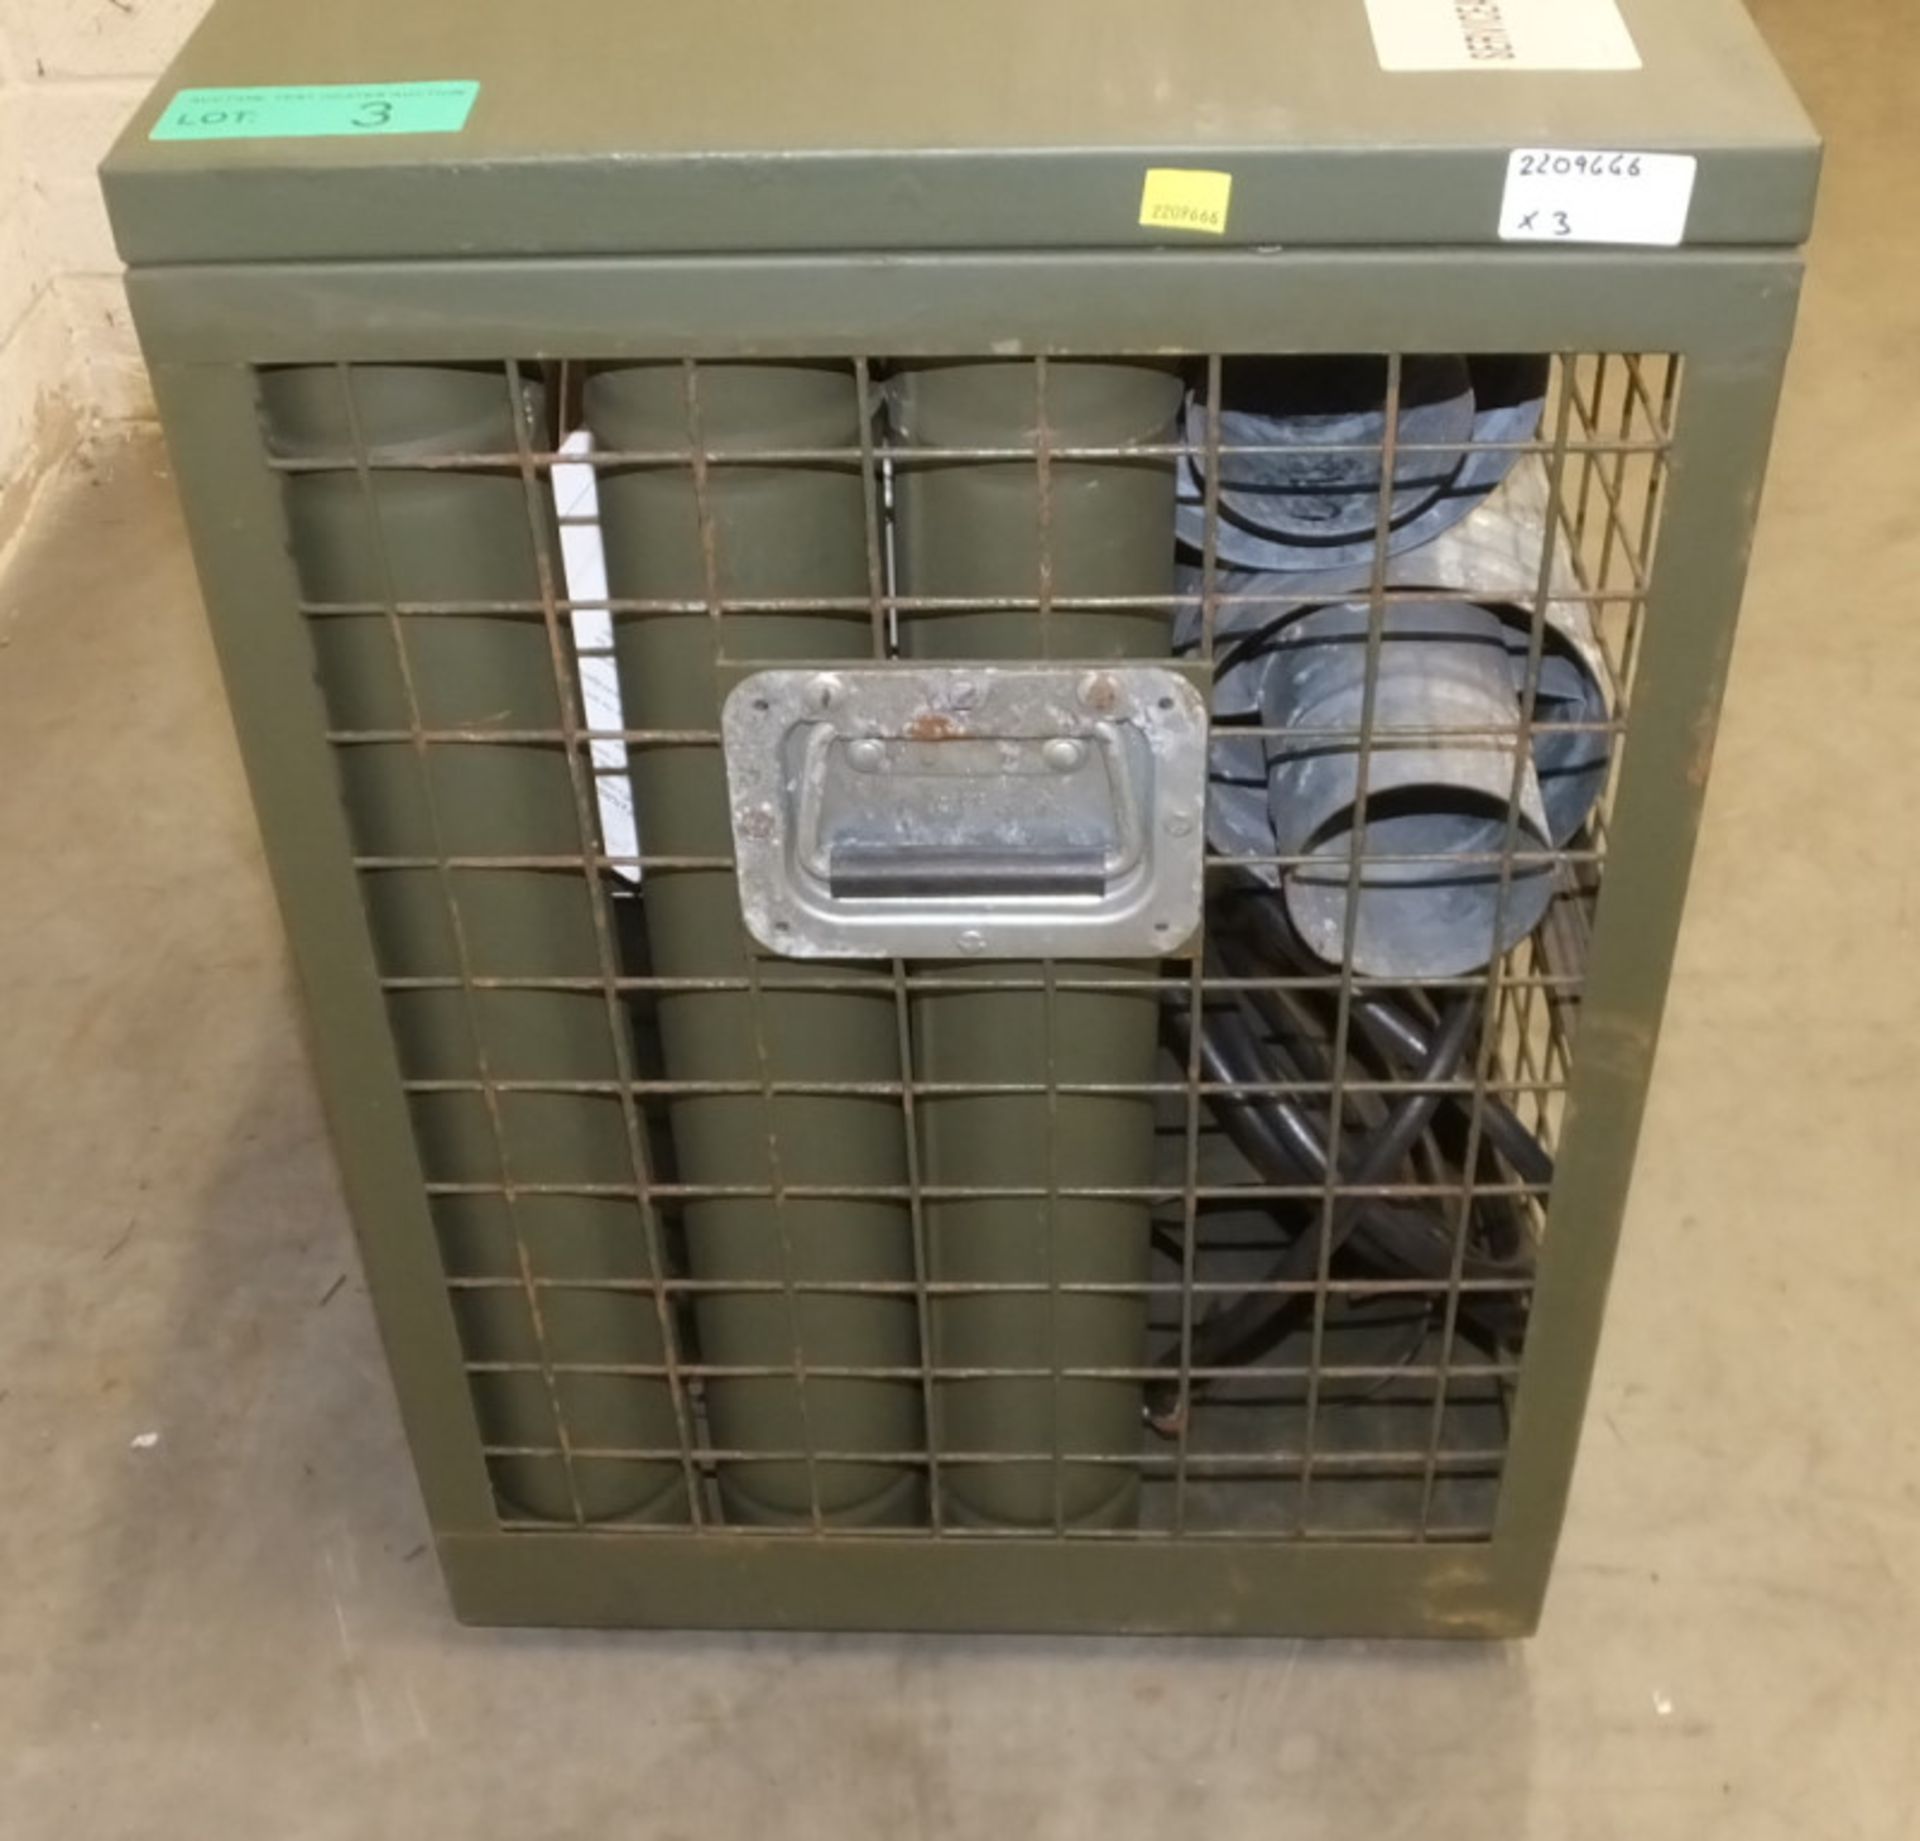 HotBox Heaters Tent Heater GHS III - NSN 4520-99-130-6045 Output - 5-15kW, Ex-MOD specific - Image 13 of 13